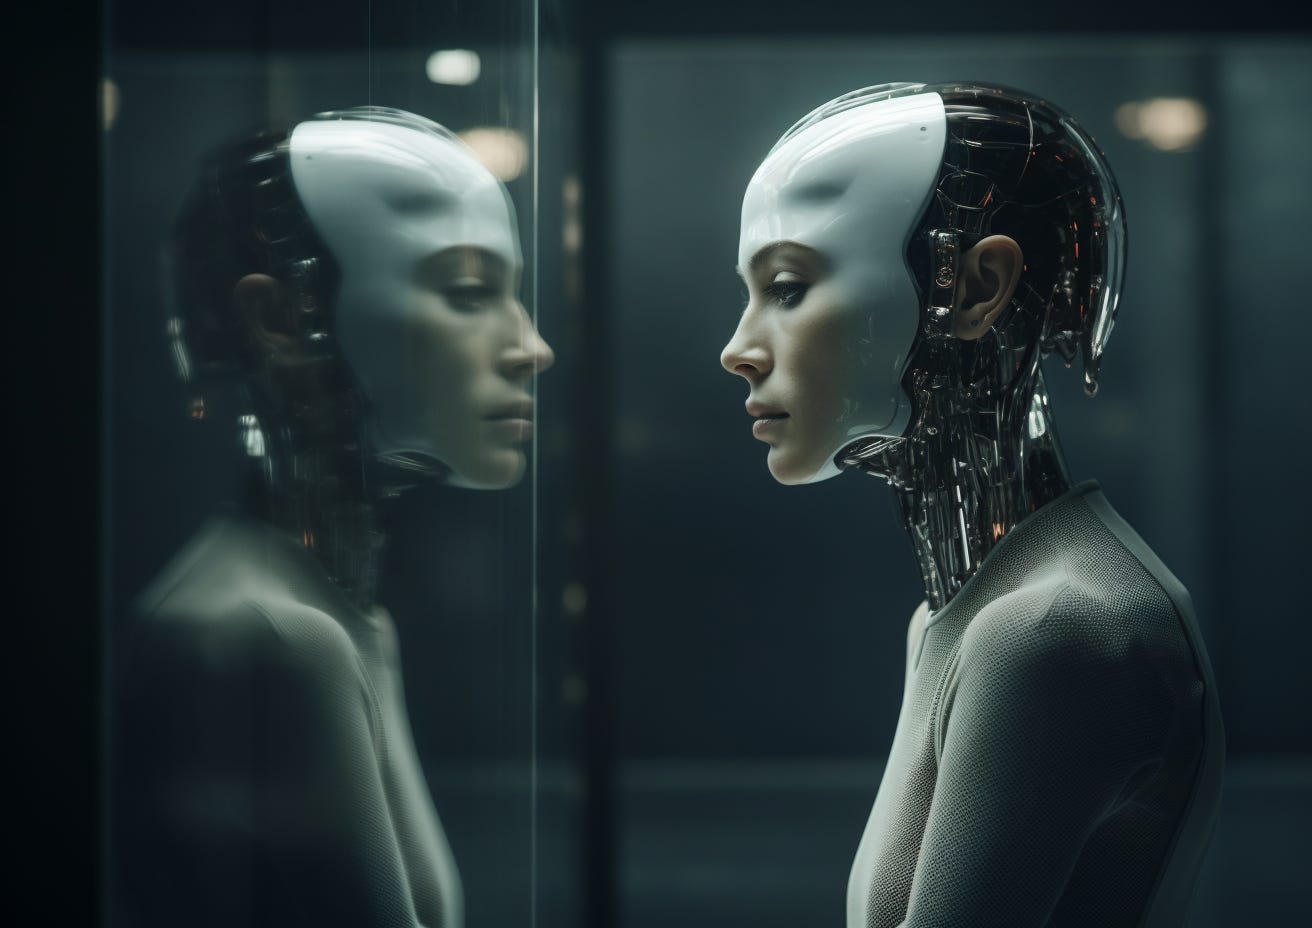 A humanoid robot contemplates its reflection in a mirror